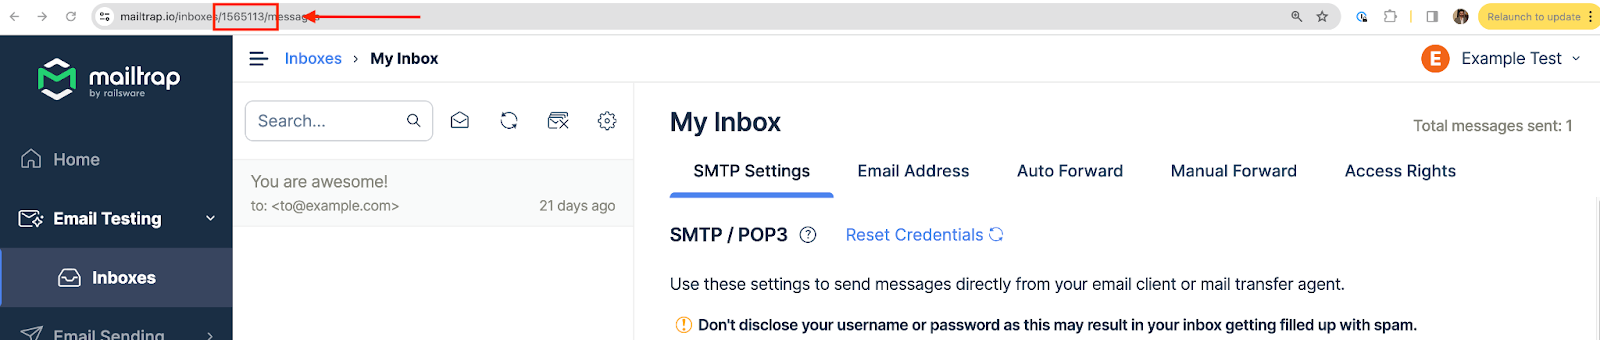 Mailtrap Email Testing Inbox ID 